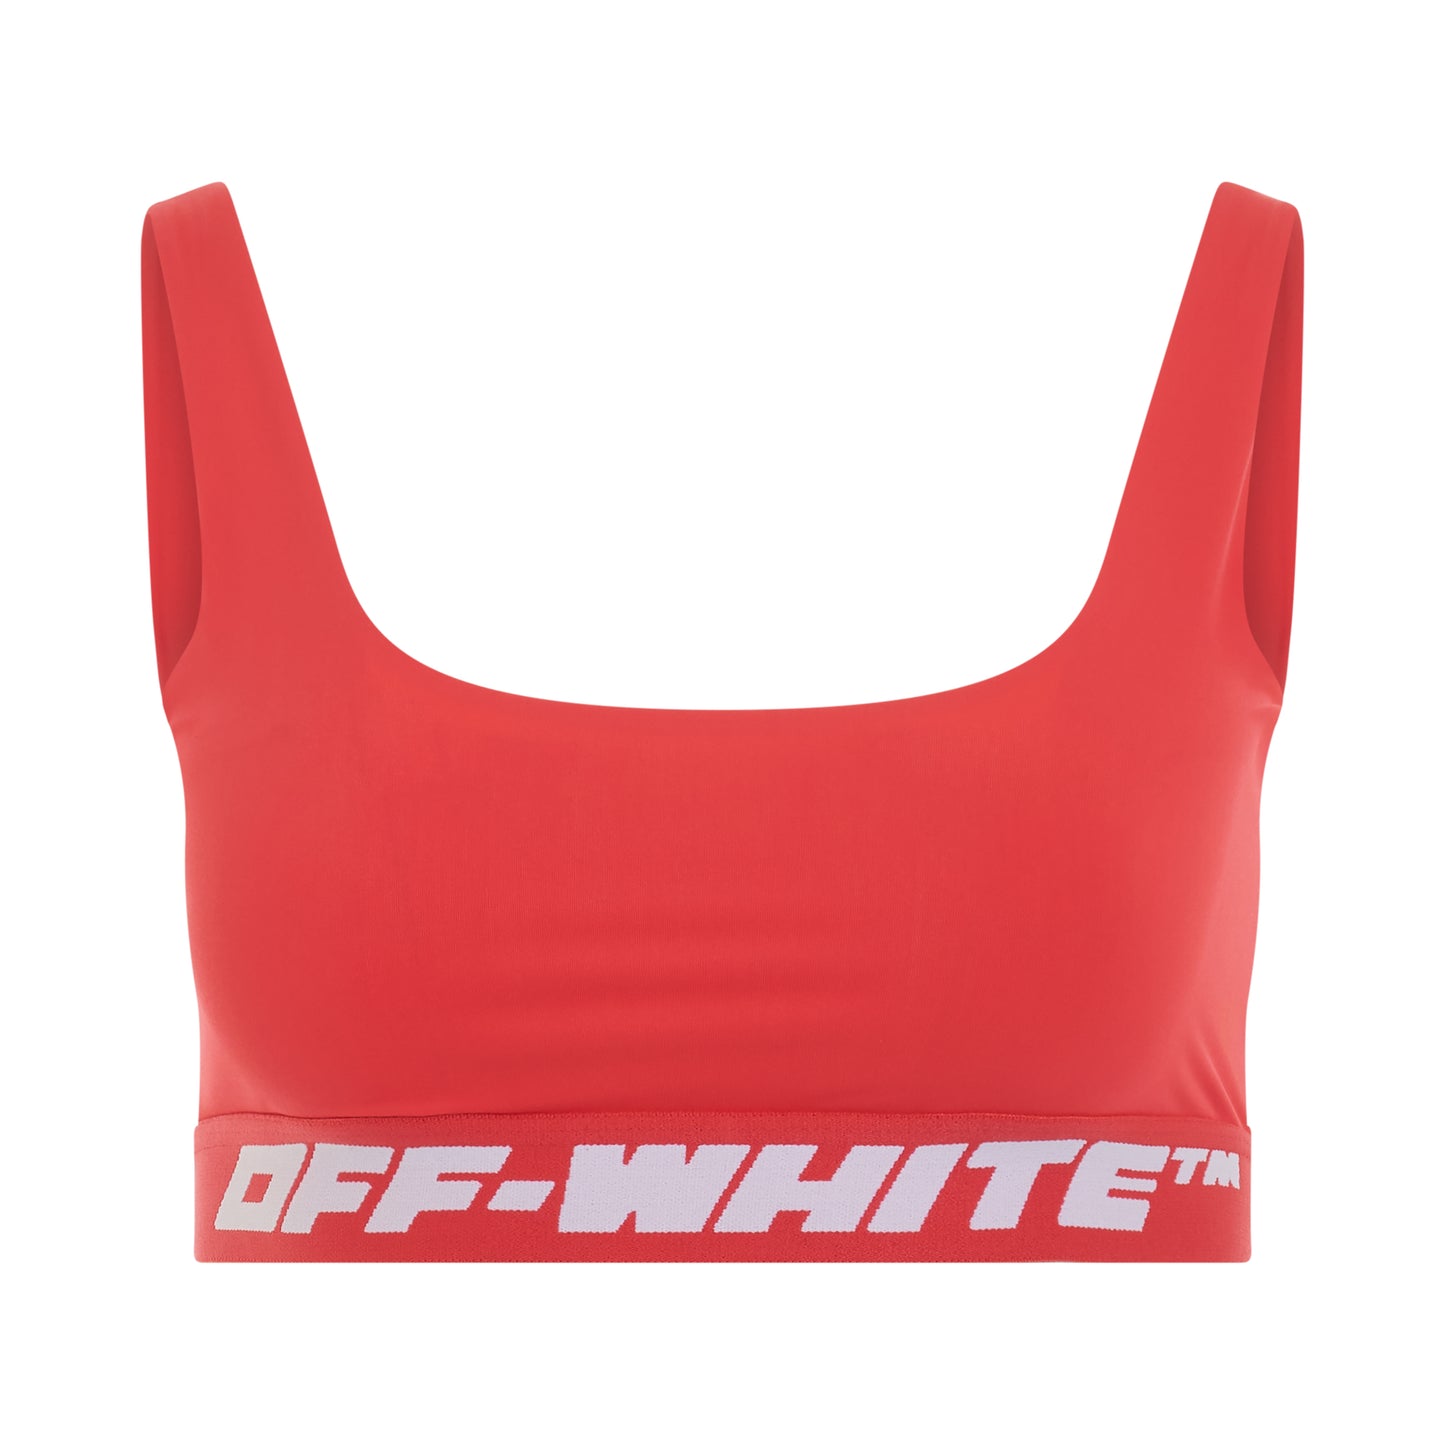 Athleisure Lego Band Bra in Red